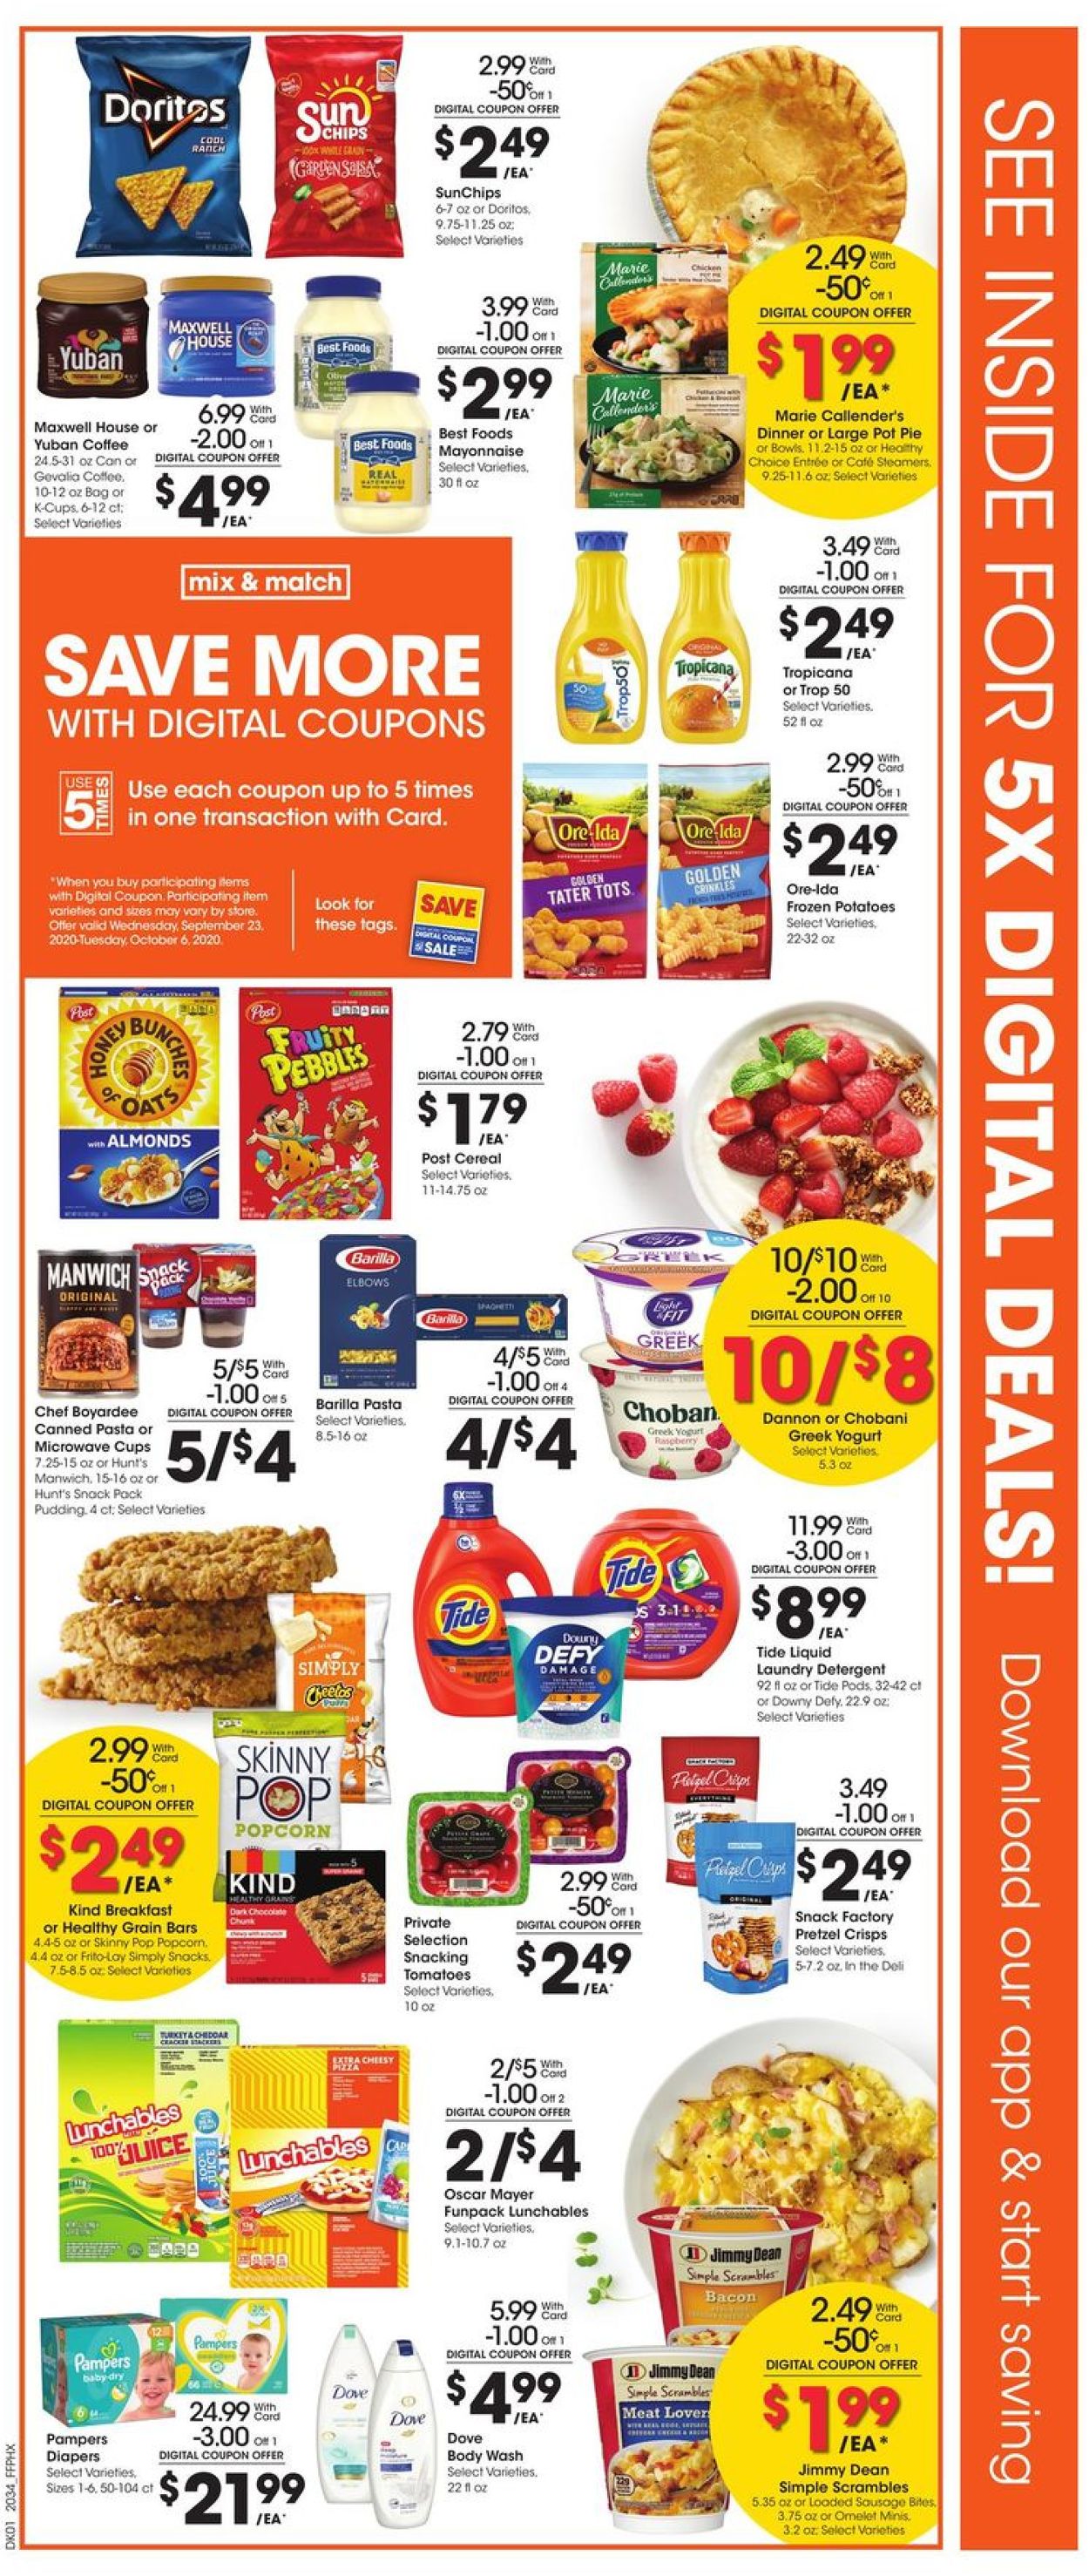 Fry’s Current weekly ad 09/23 - 09/29/2020 [2] - frequent-ads.com